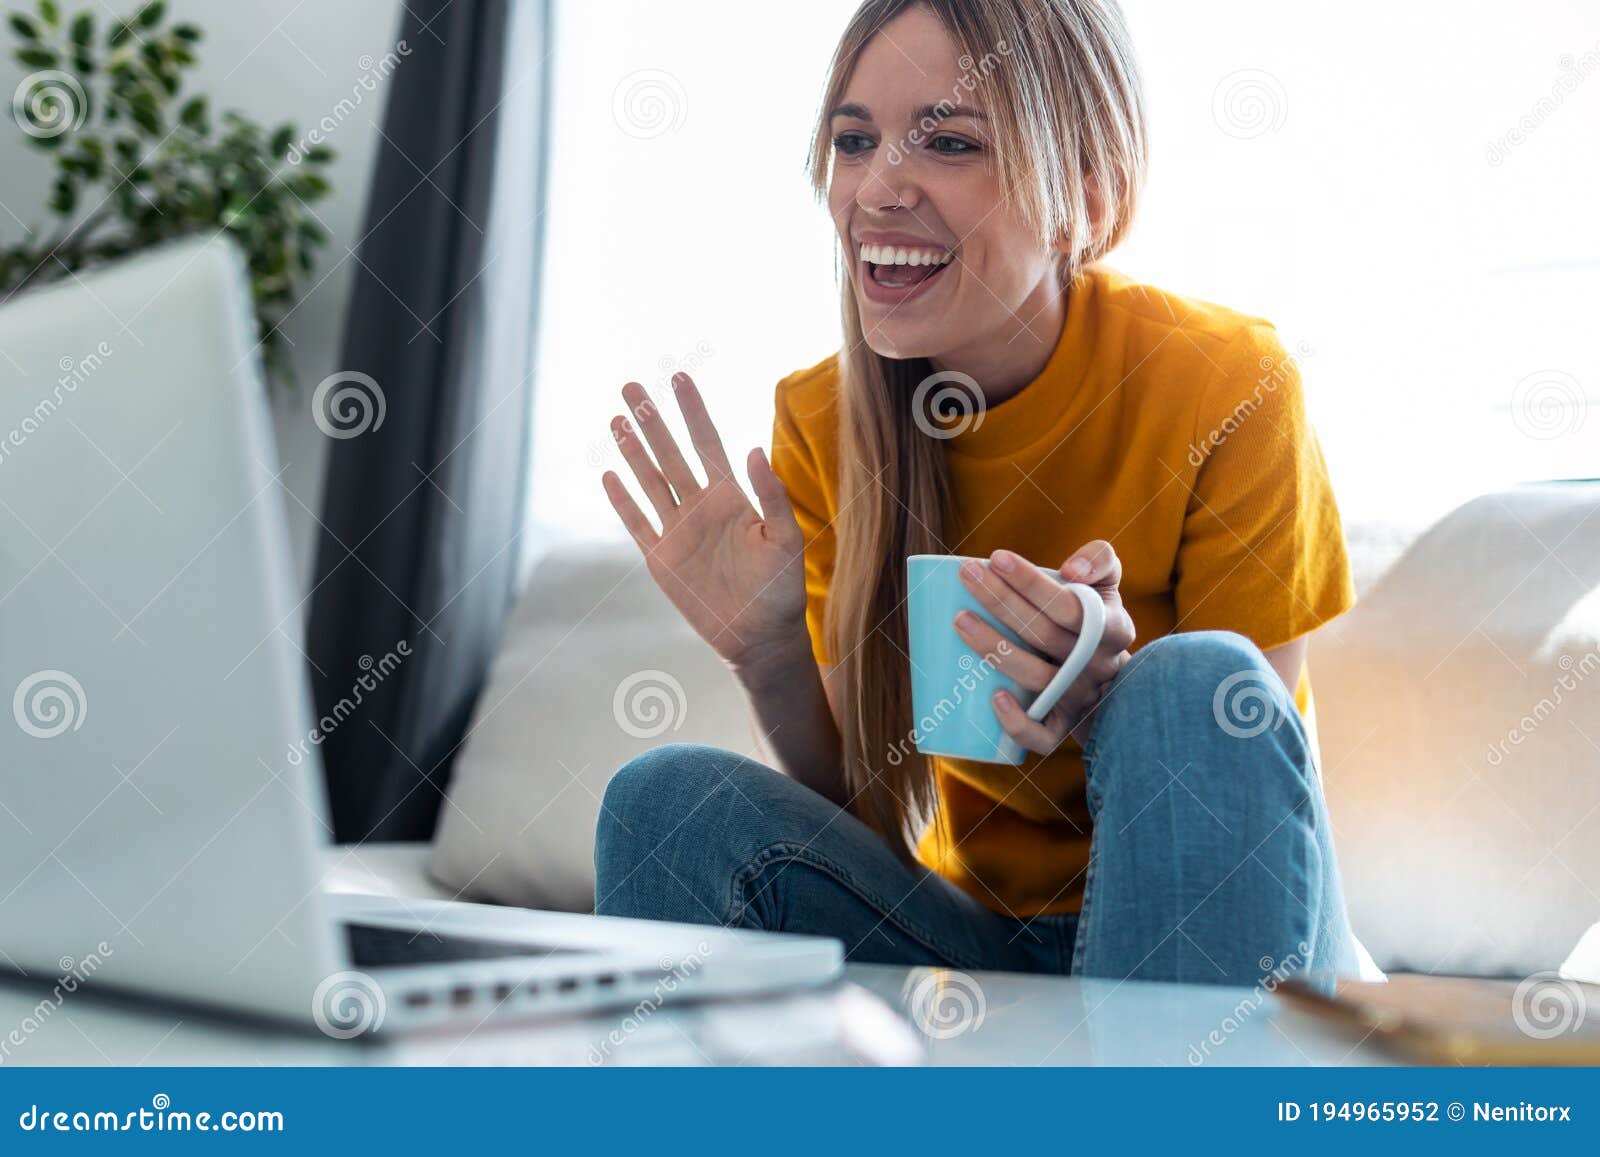 smiling young blonde woman having videocall on laptop sitting on the couch